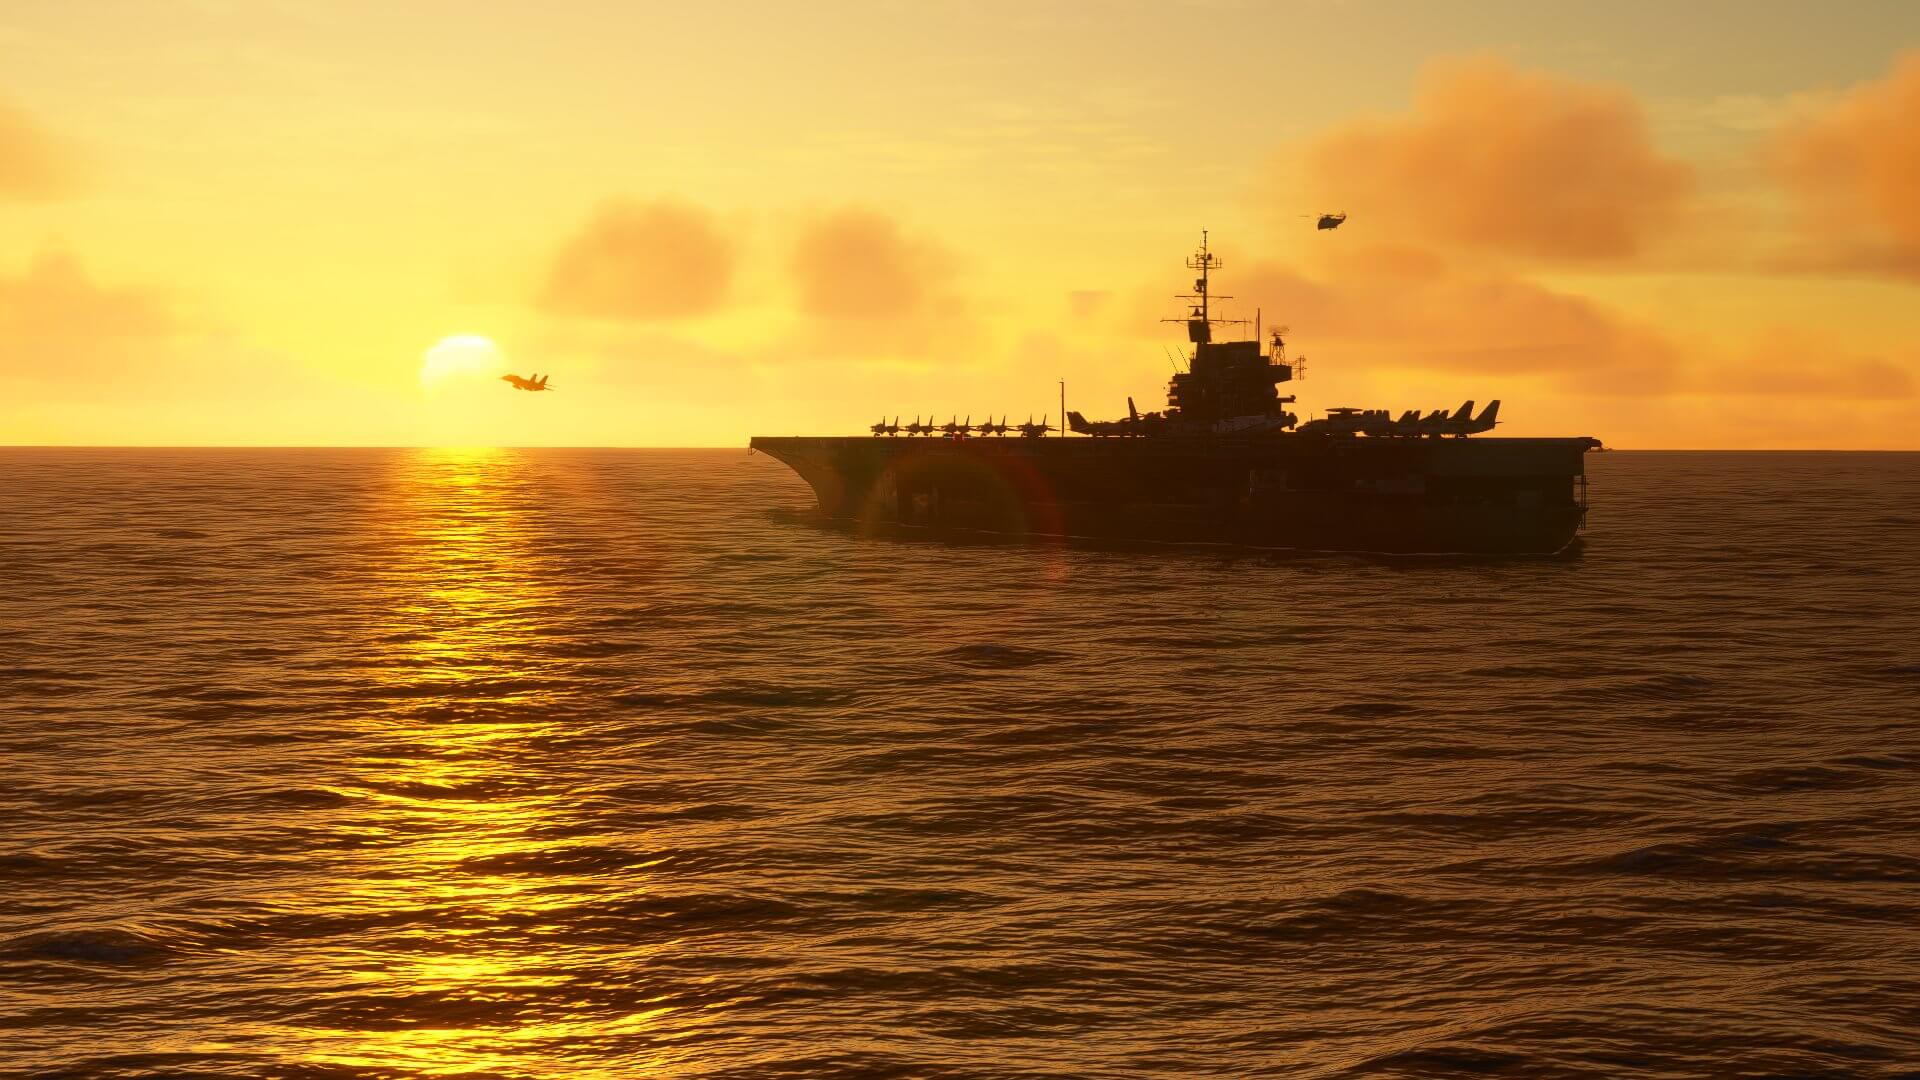 An Aircraft Carrier with multiple aircraft flying close by